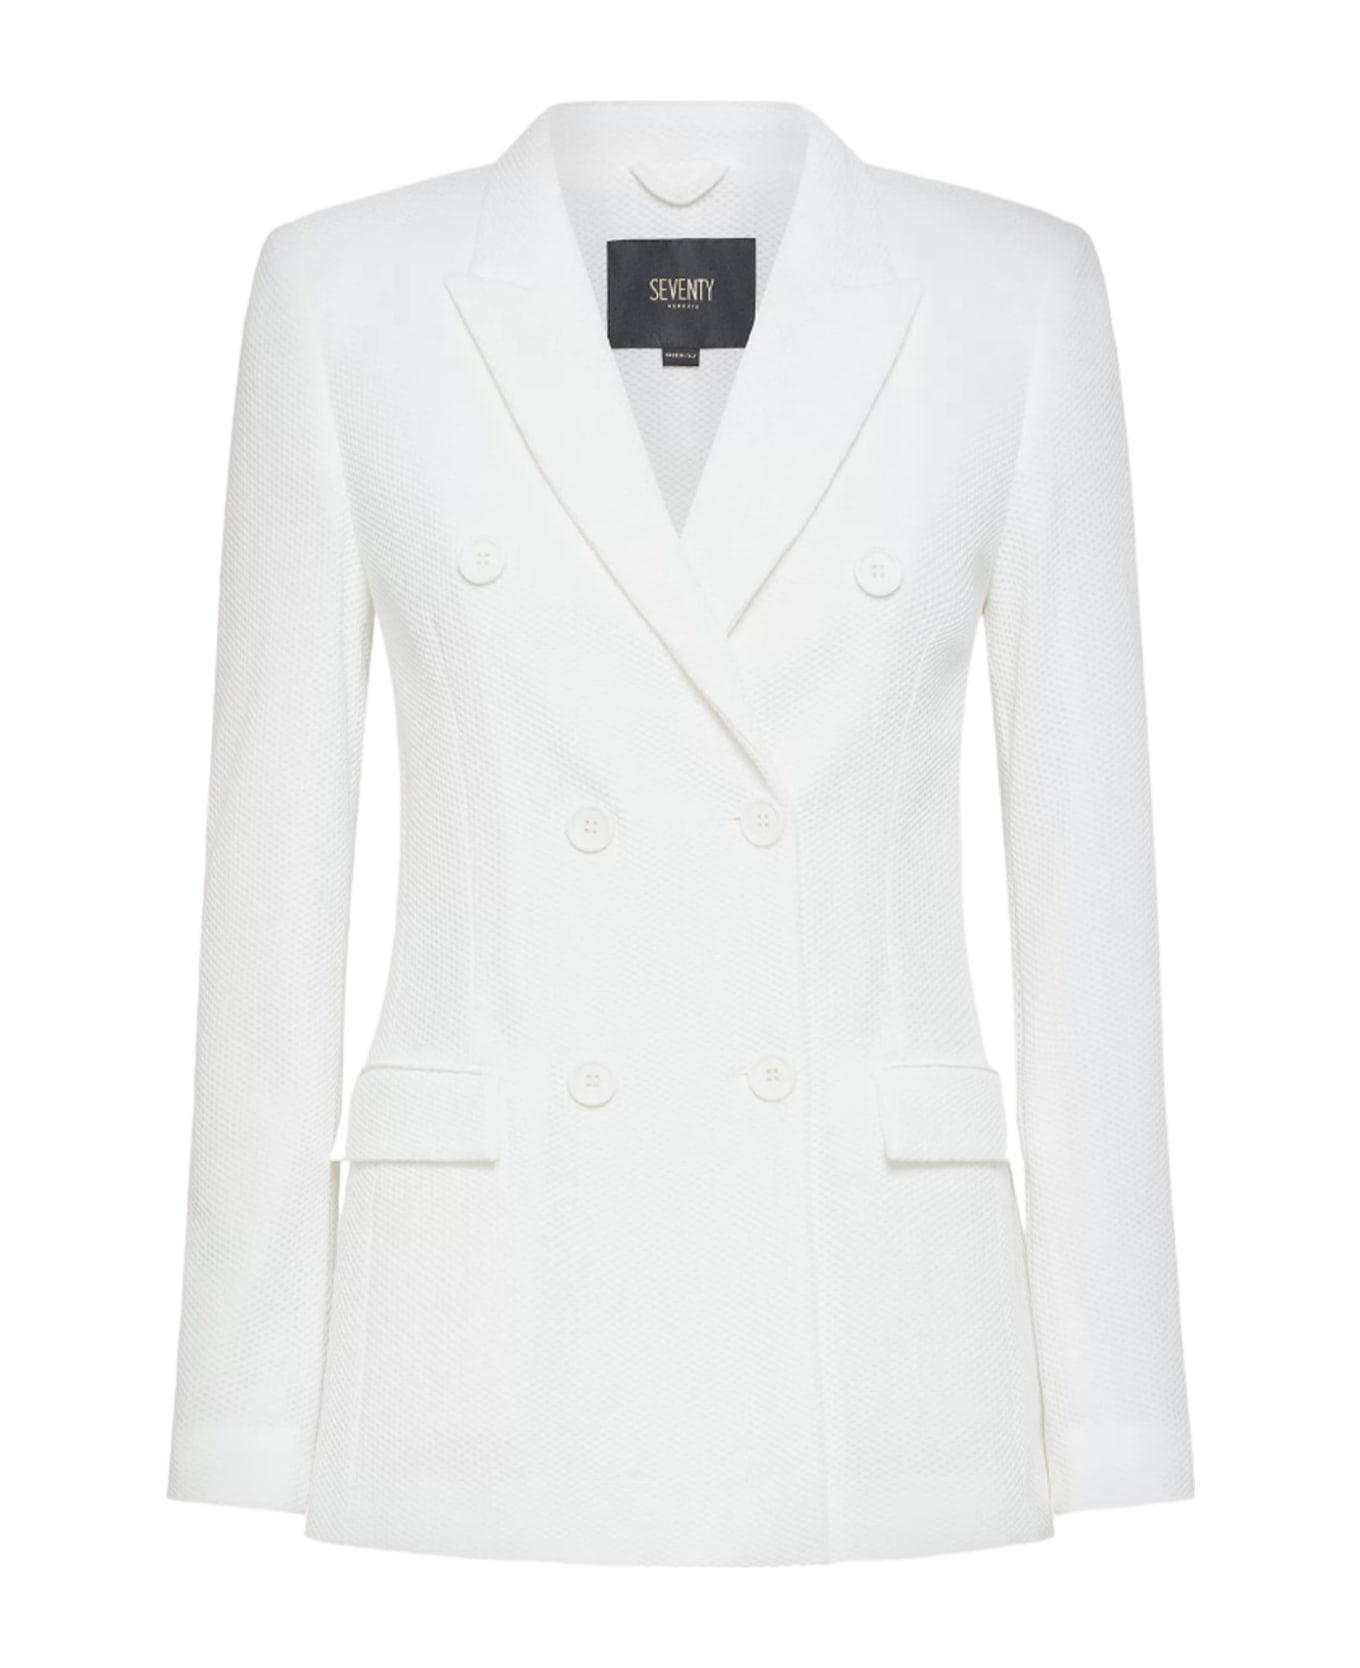 Seventy Double-breasted Jacket In Honeycomb Fabric - BIANCO